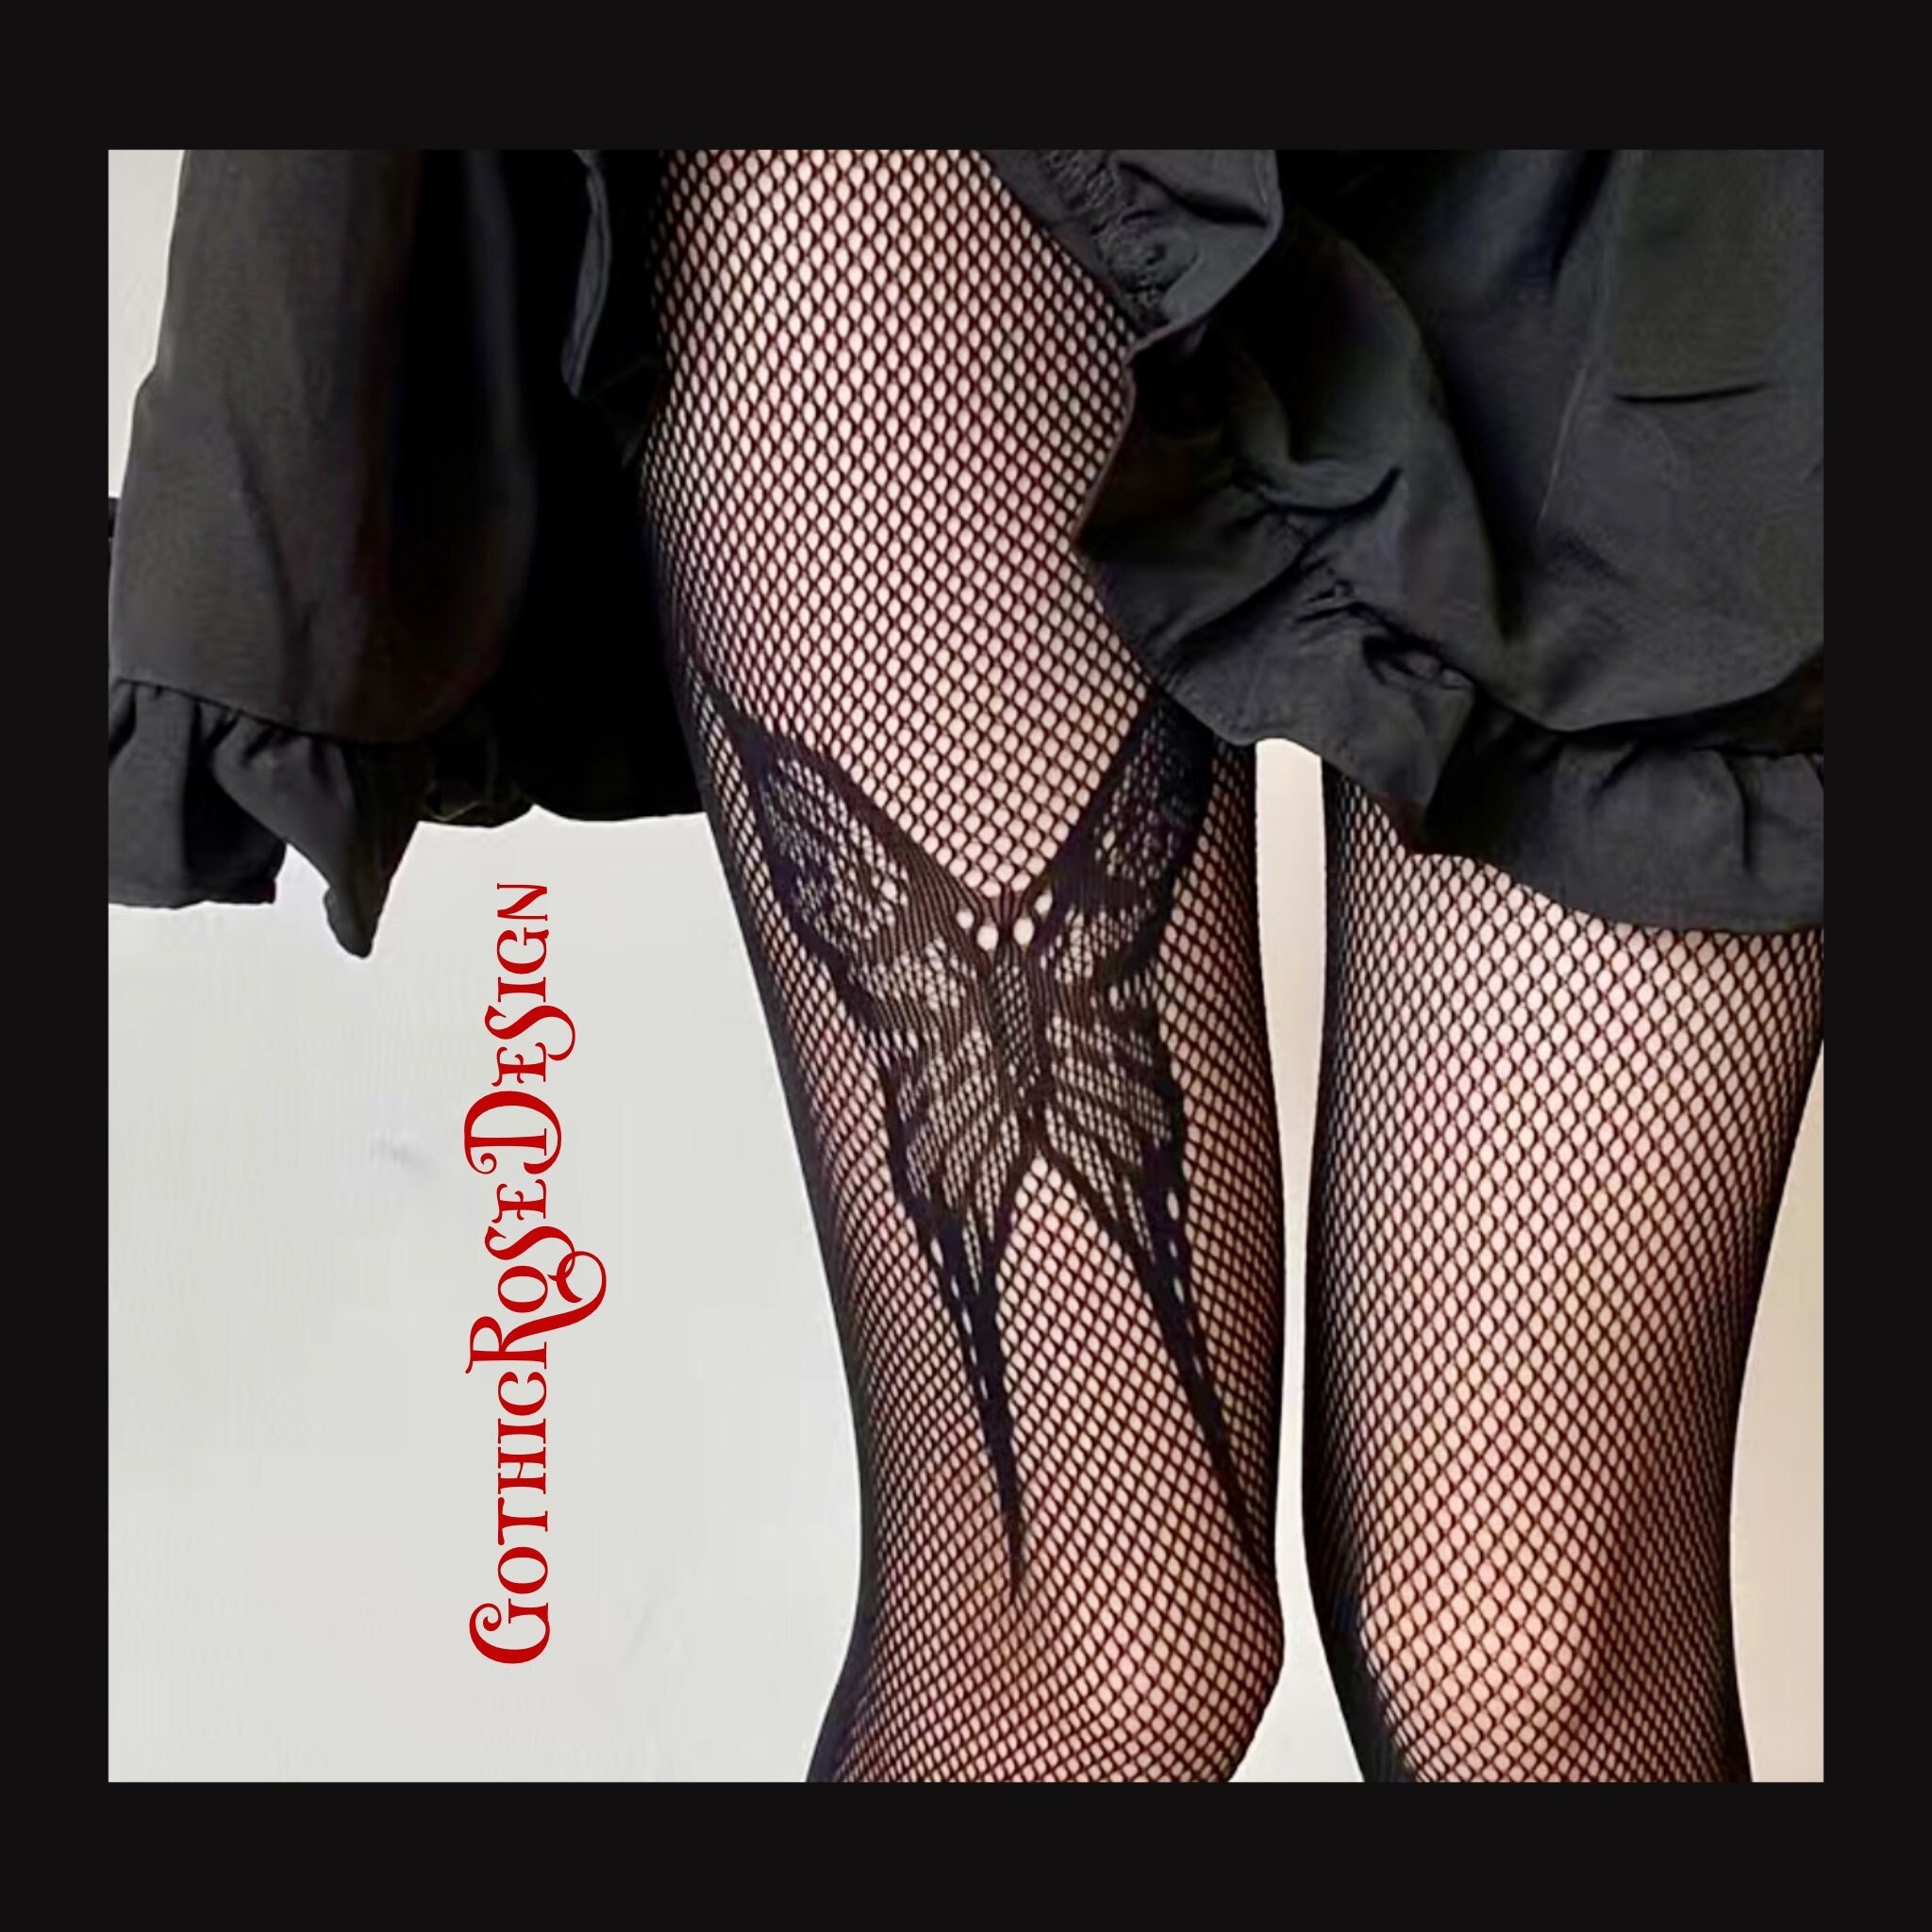 Fishnet Stockings Black for Women Mesh Tights Available in Plus